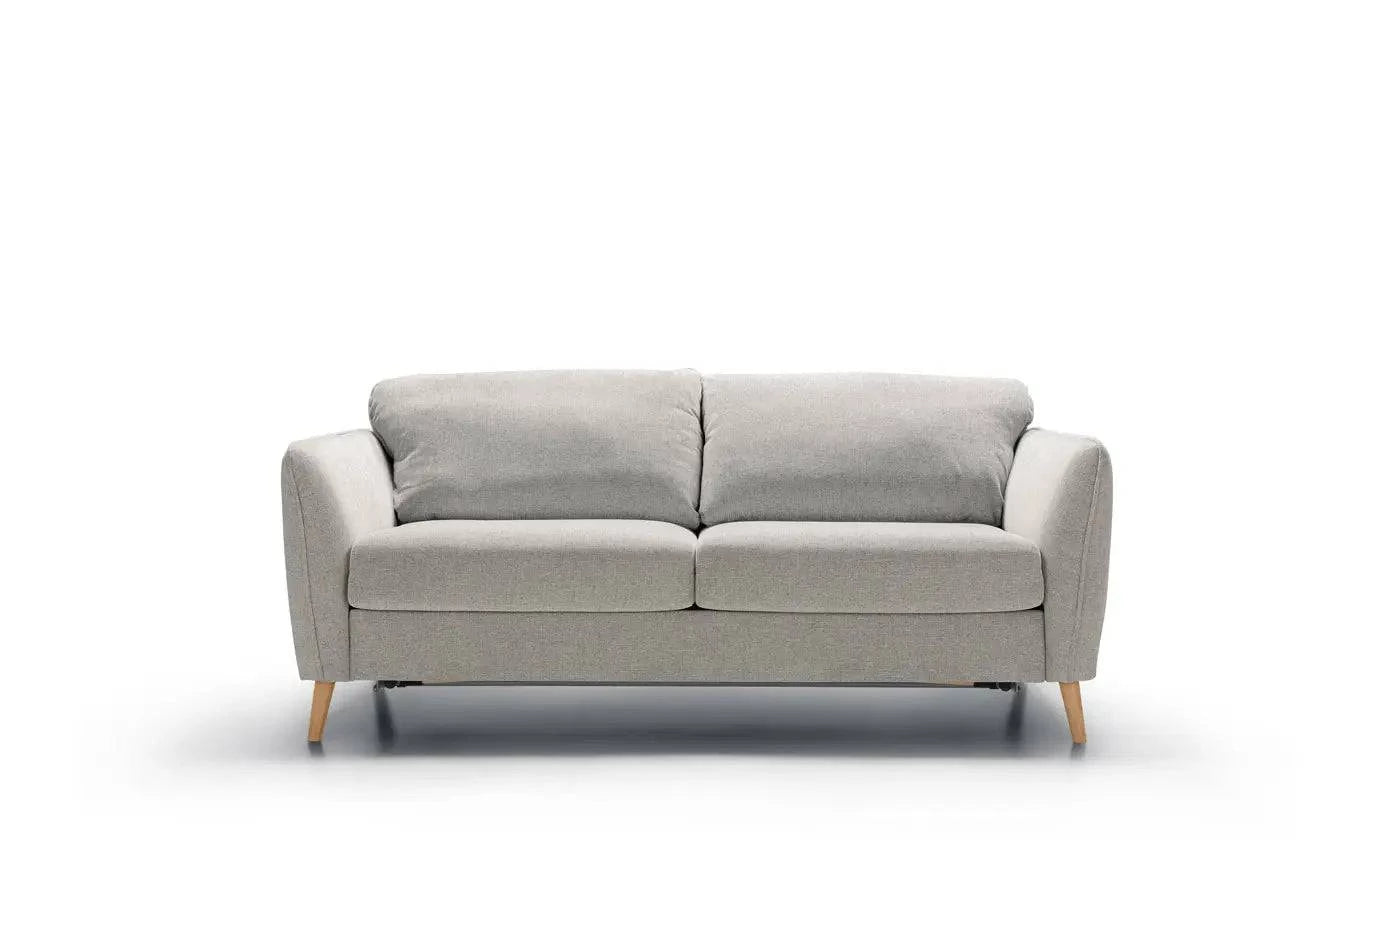 Lucy - Sofabed - Rydan Interiors